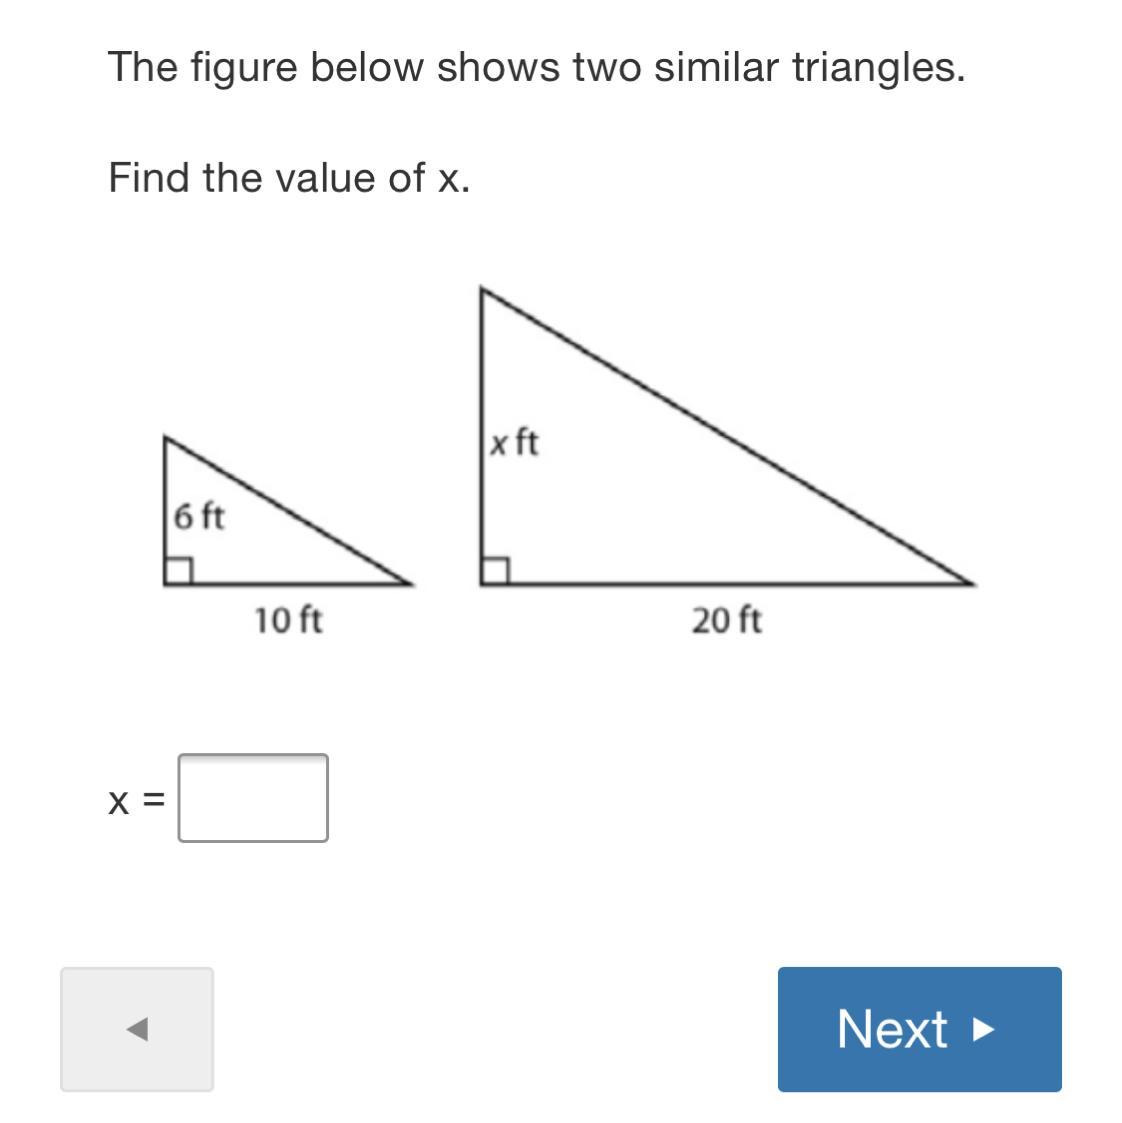 I Need Help With This Question 